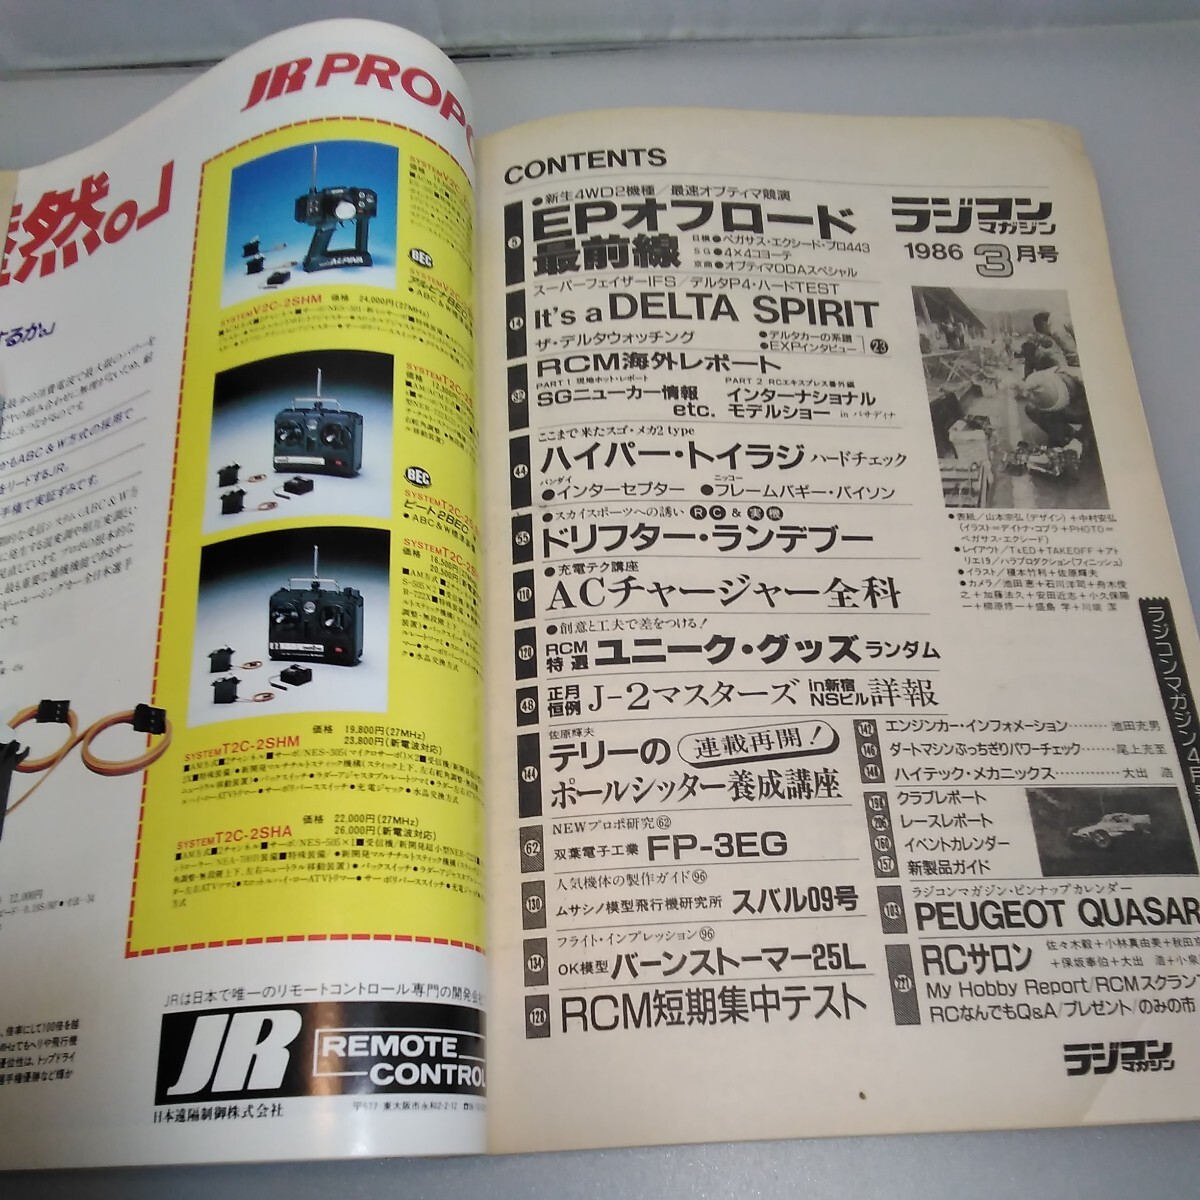 [ that time thing ] radio-controller magazine *1986 year 3 month number no. 9 volume no. 3 number * Showa era 61 year 3 month issue *RCmagazine* Yaesu publish * free shipping * same day shipping * rare * the whole exhibiting 